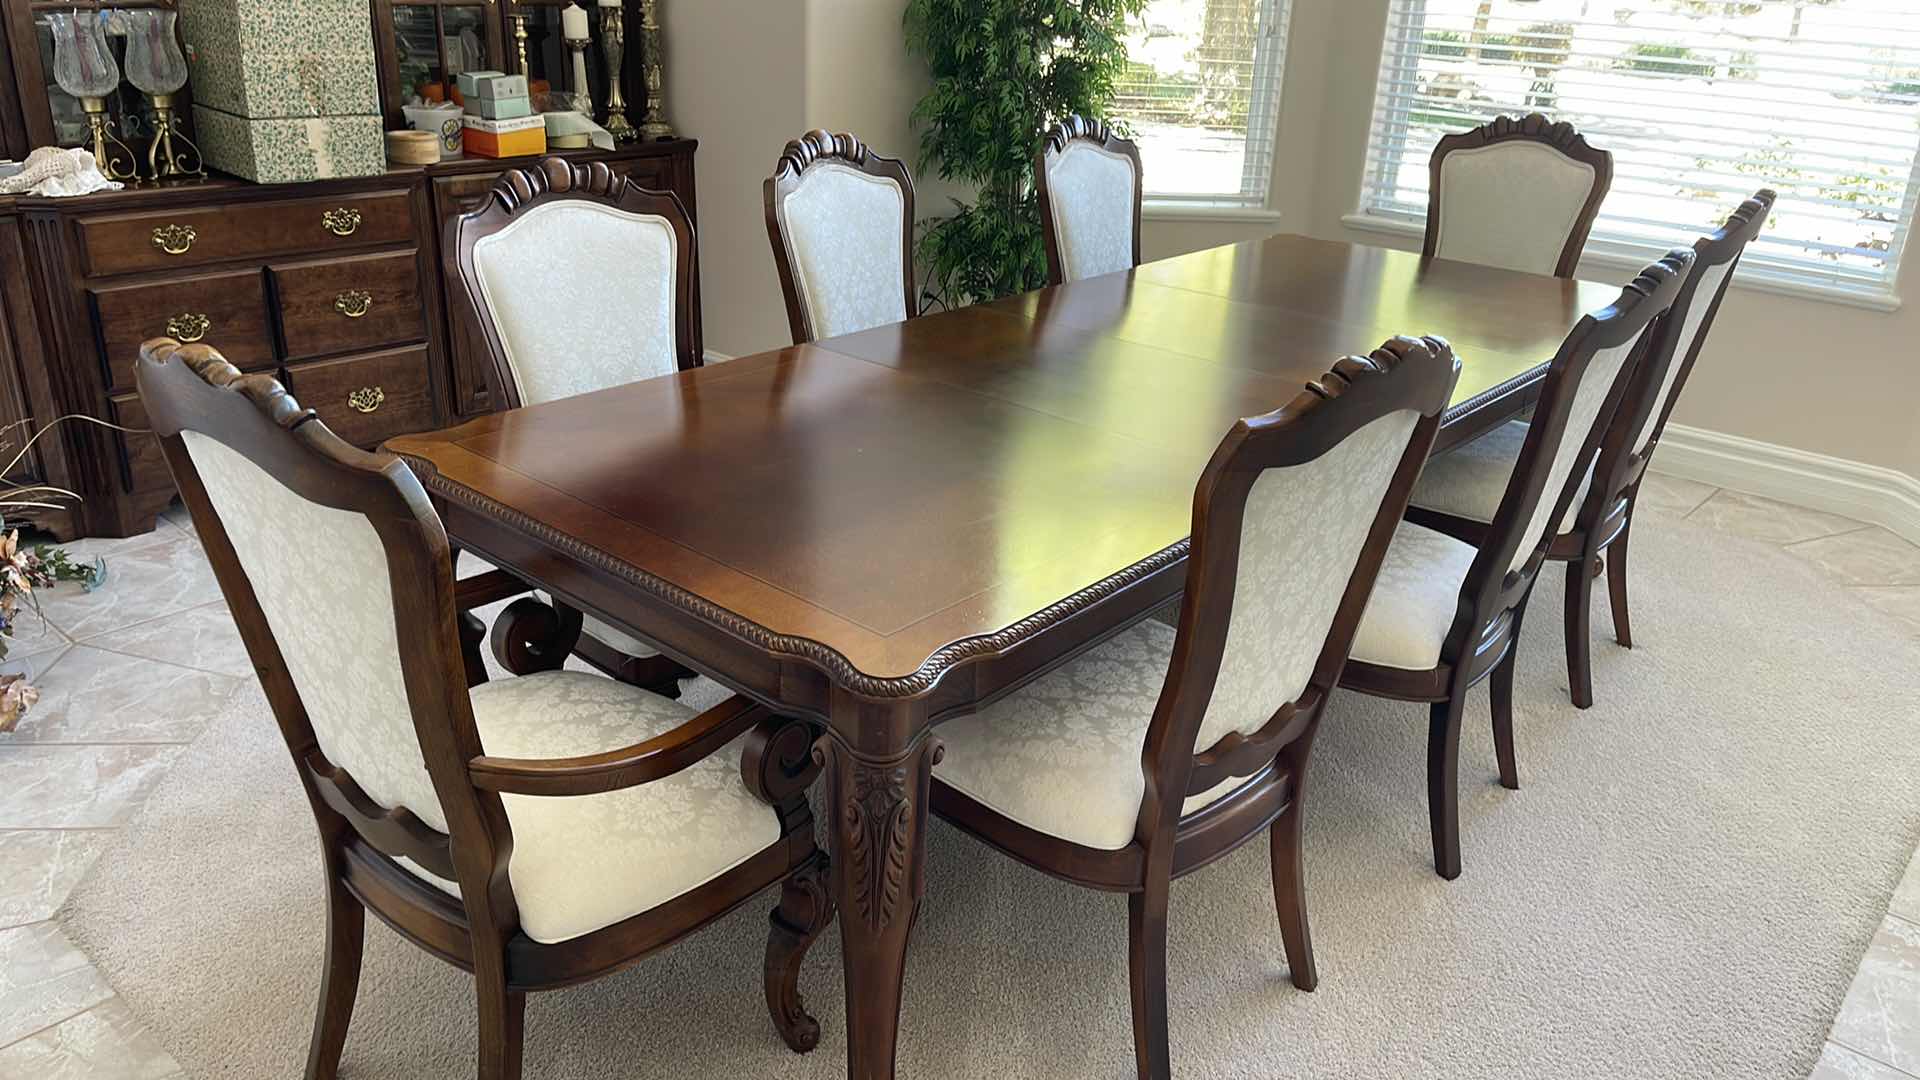 Photo 1 of 9’ THOMASVILLE RIVER ROADS FRENCH COUNTRY DINING ROOM TABLE W 8 CHAIRS